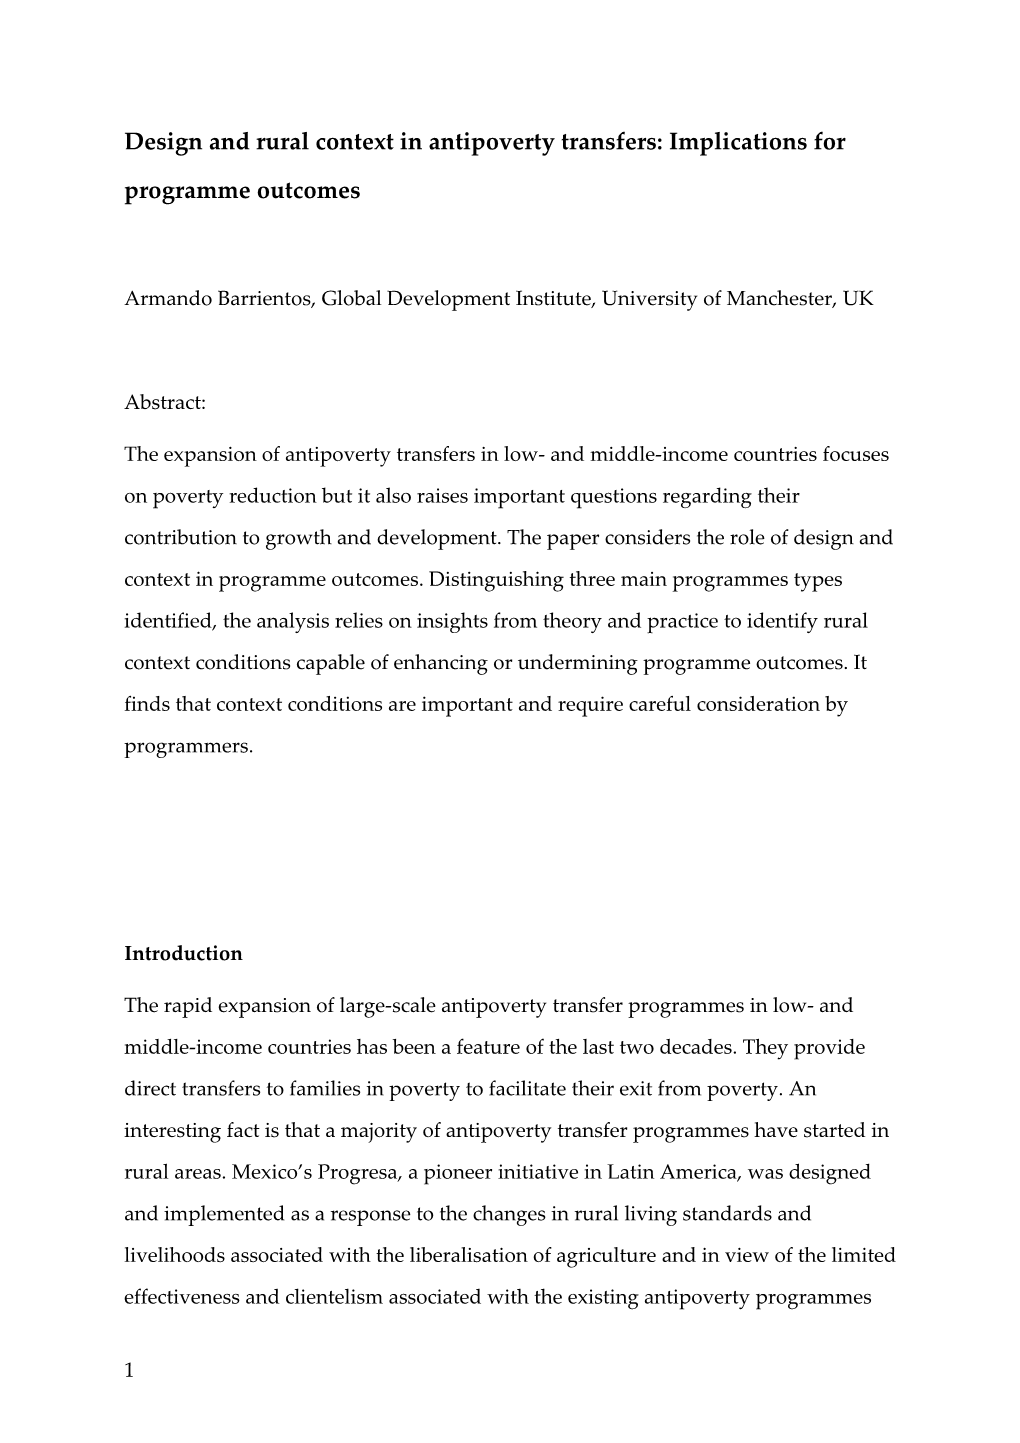 Design and Rural Context in Antipoverty Transfers: Implications for Programme Outcomes